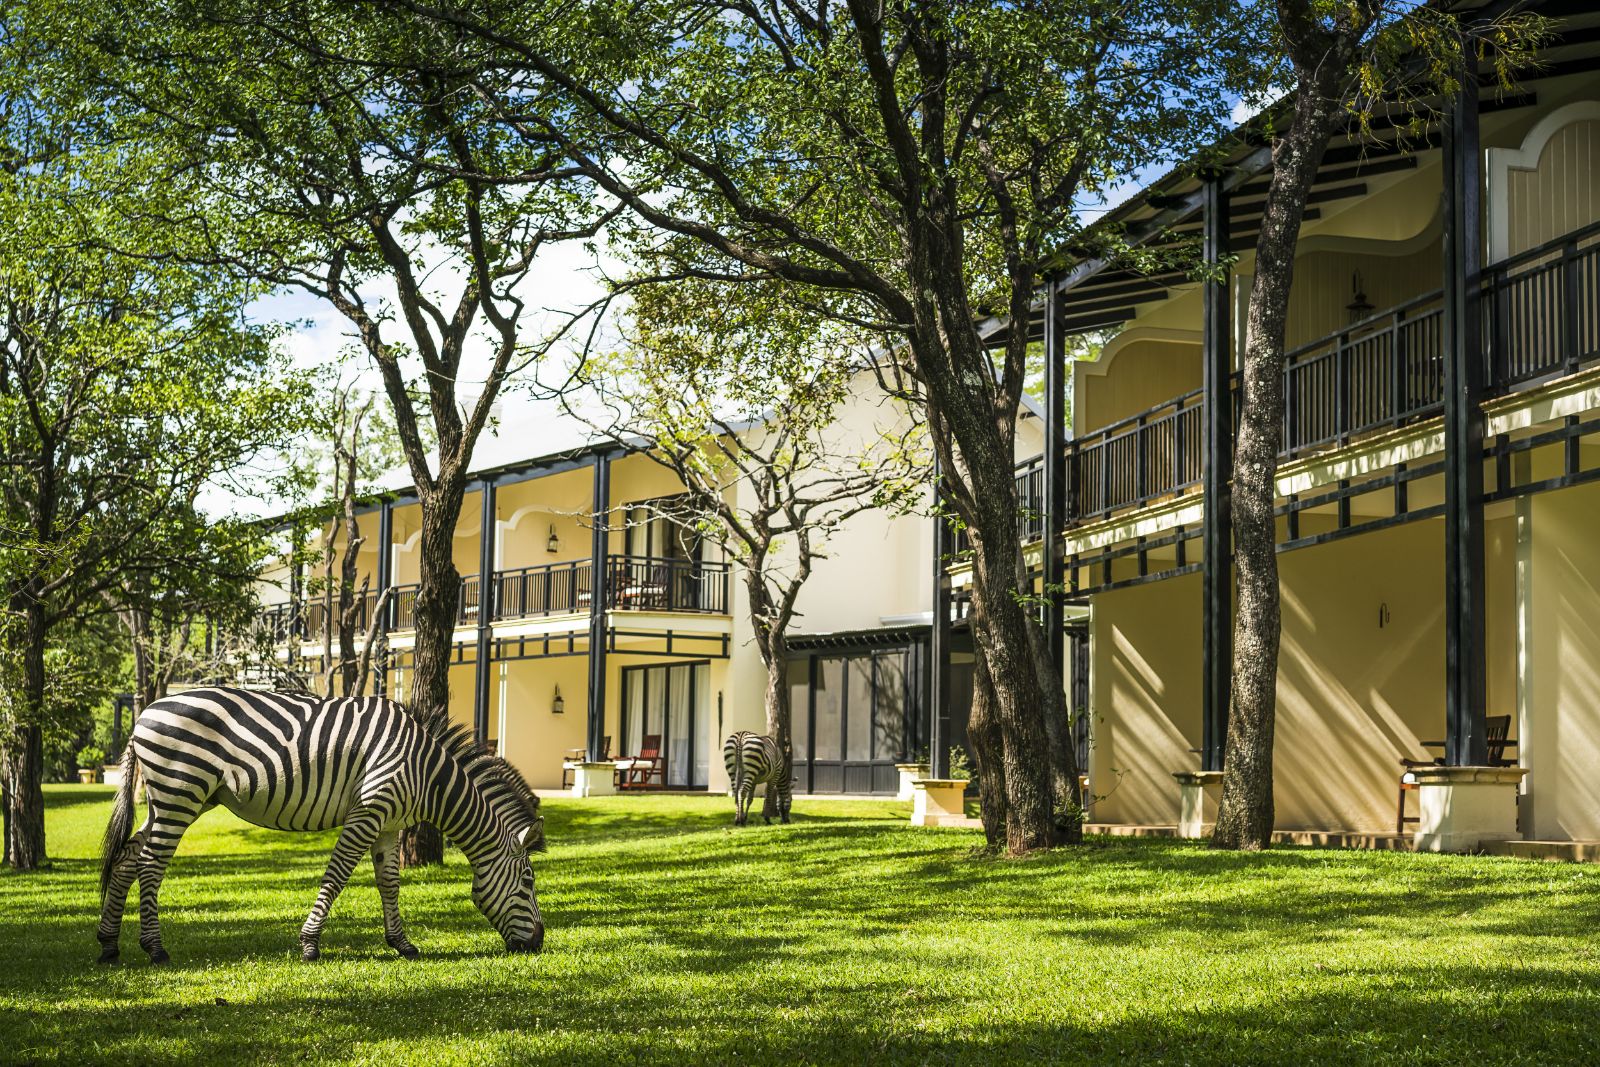 Zebras outside accommodation at The Royal Livingstone at Victoria Falls in Zambia